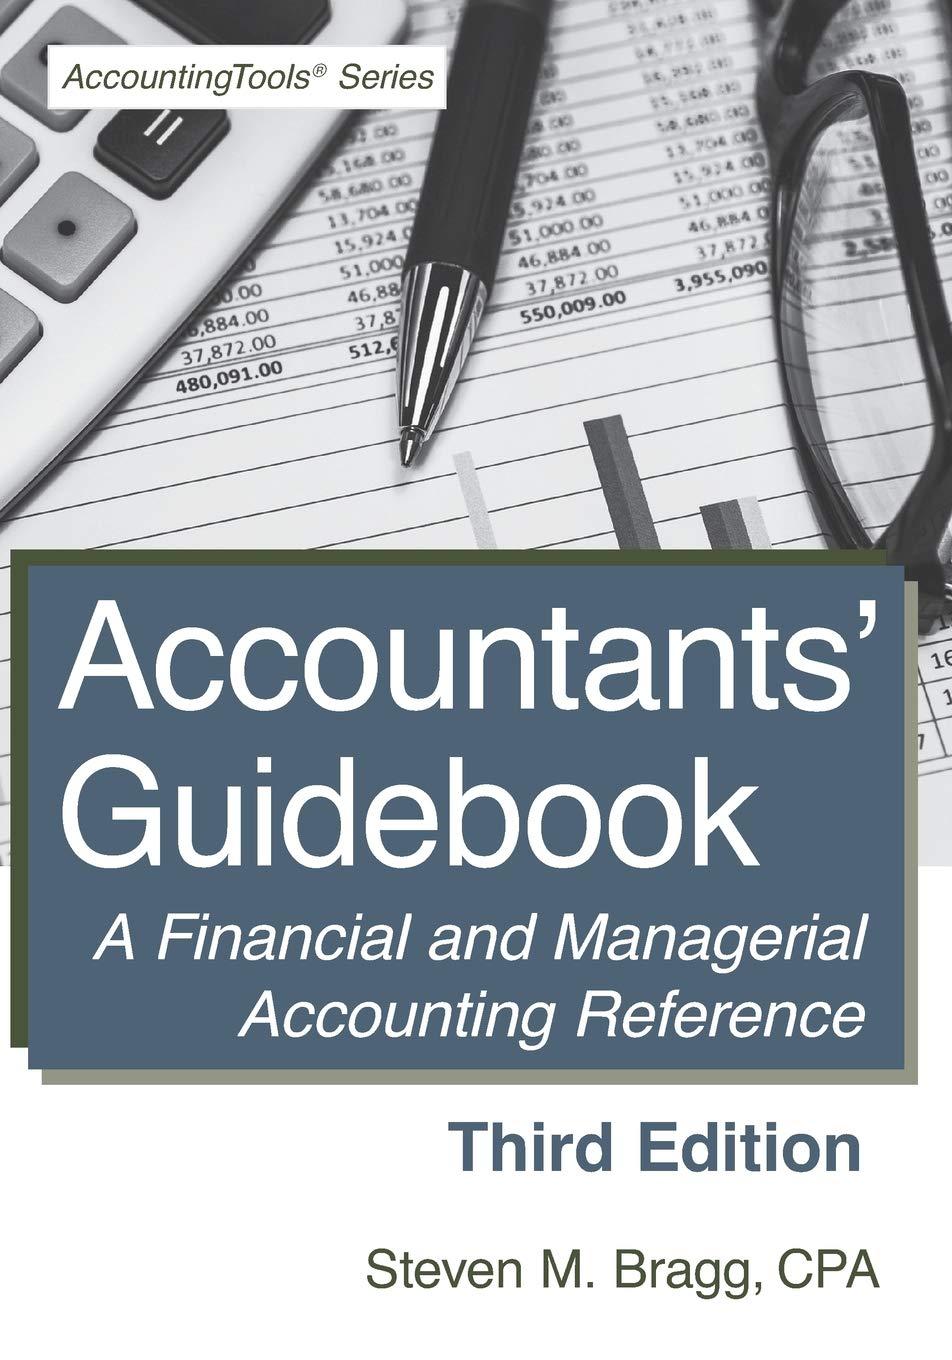 accountants guidebook a financial and managerial accounting reference 3rd edition steven m. bragg 1938910842,